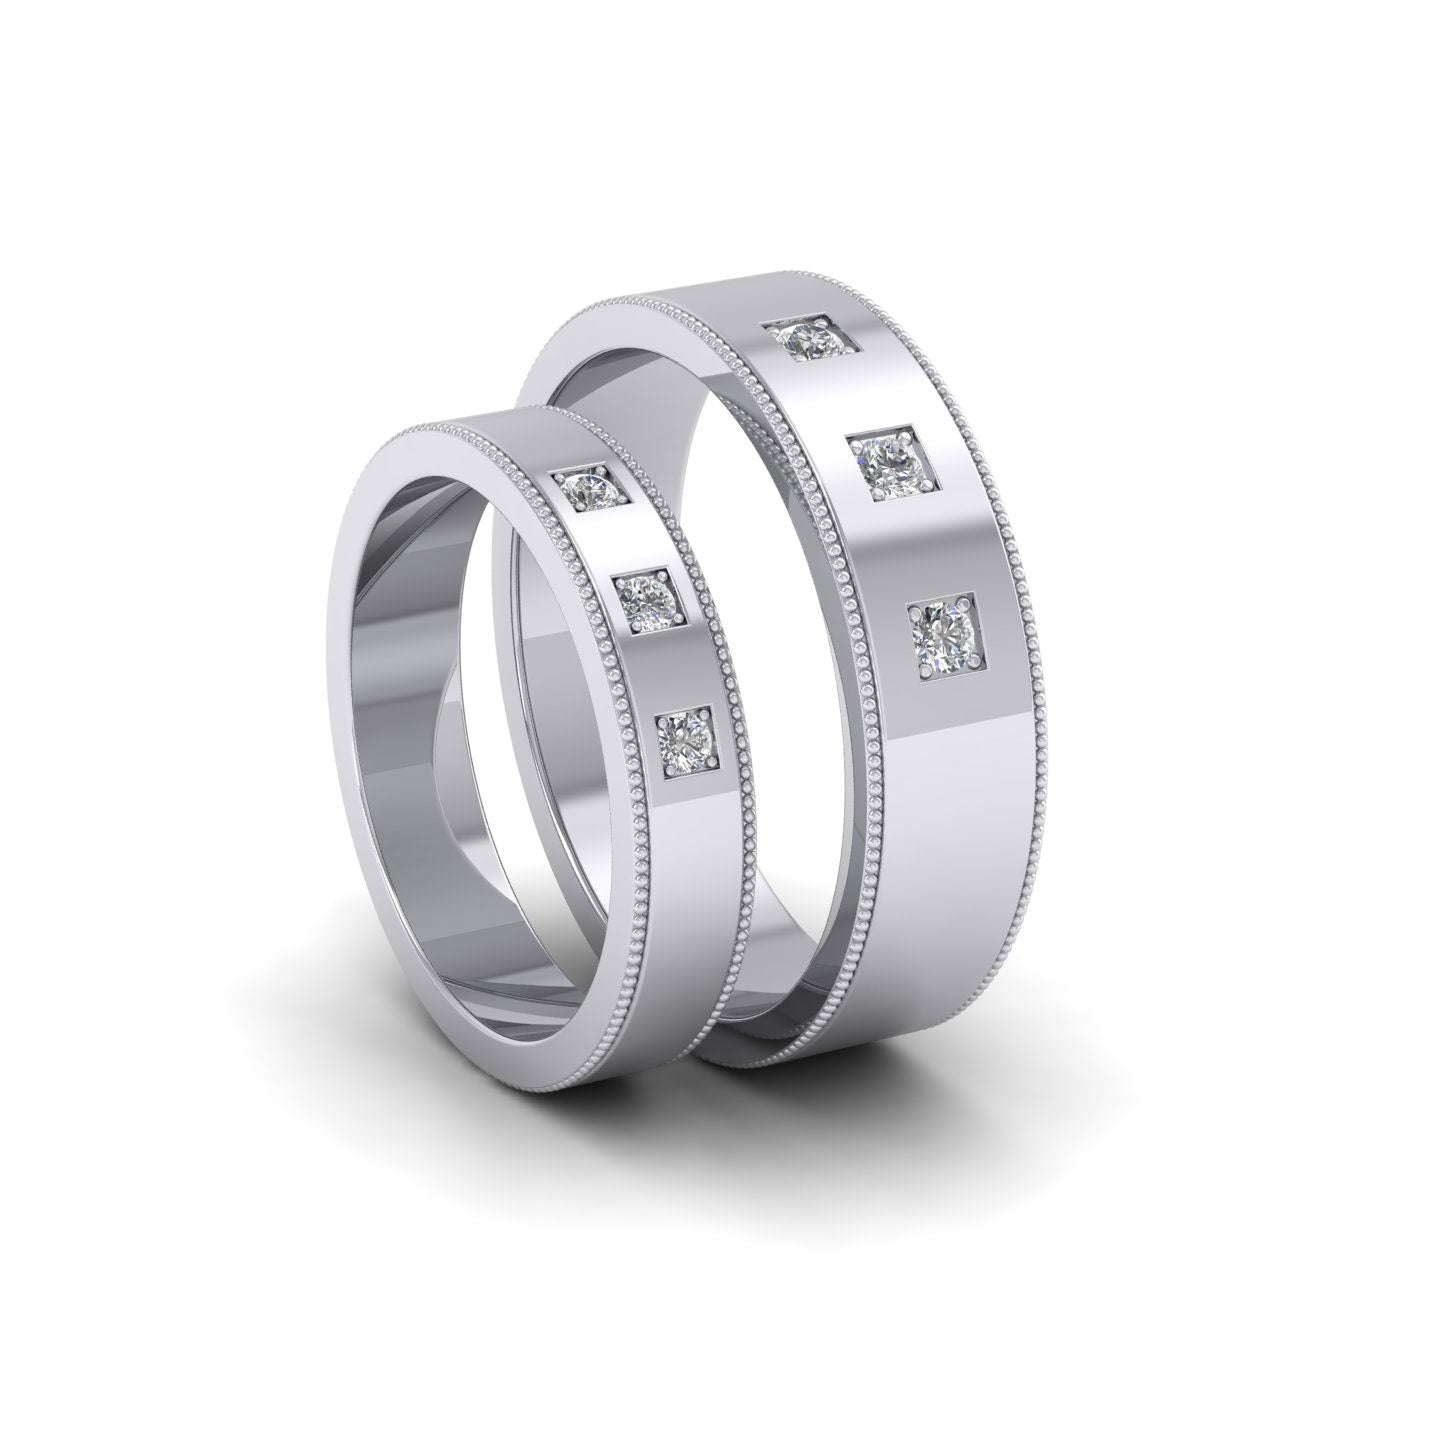 Three Diamonds With Square Setting 9ct White Gold 6mm Wedding Ring With Millgrain Edge